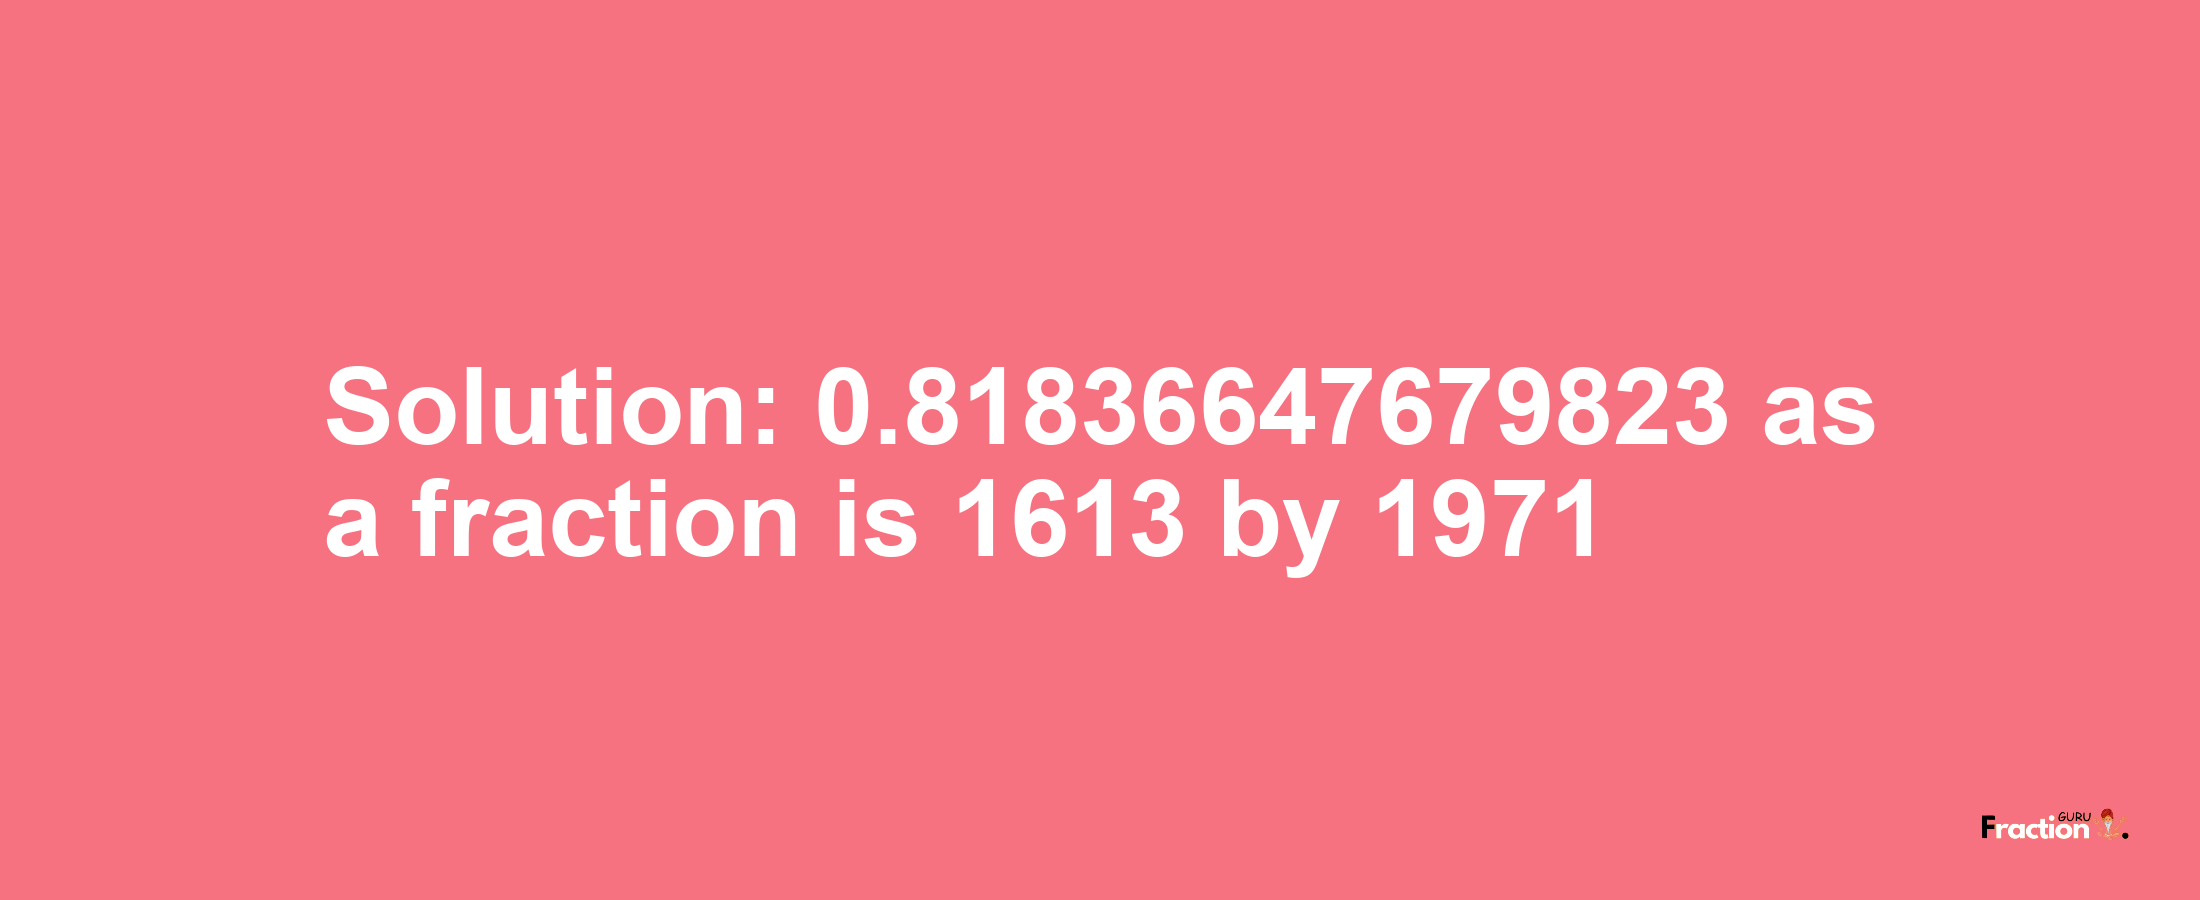 Solution:0.81836647679823 as a fraction is 1613/1971